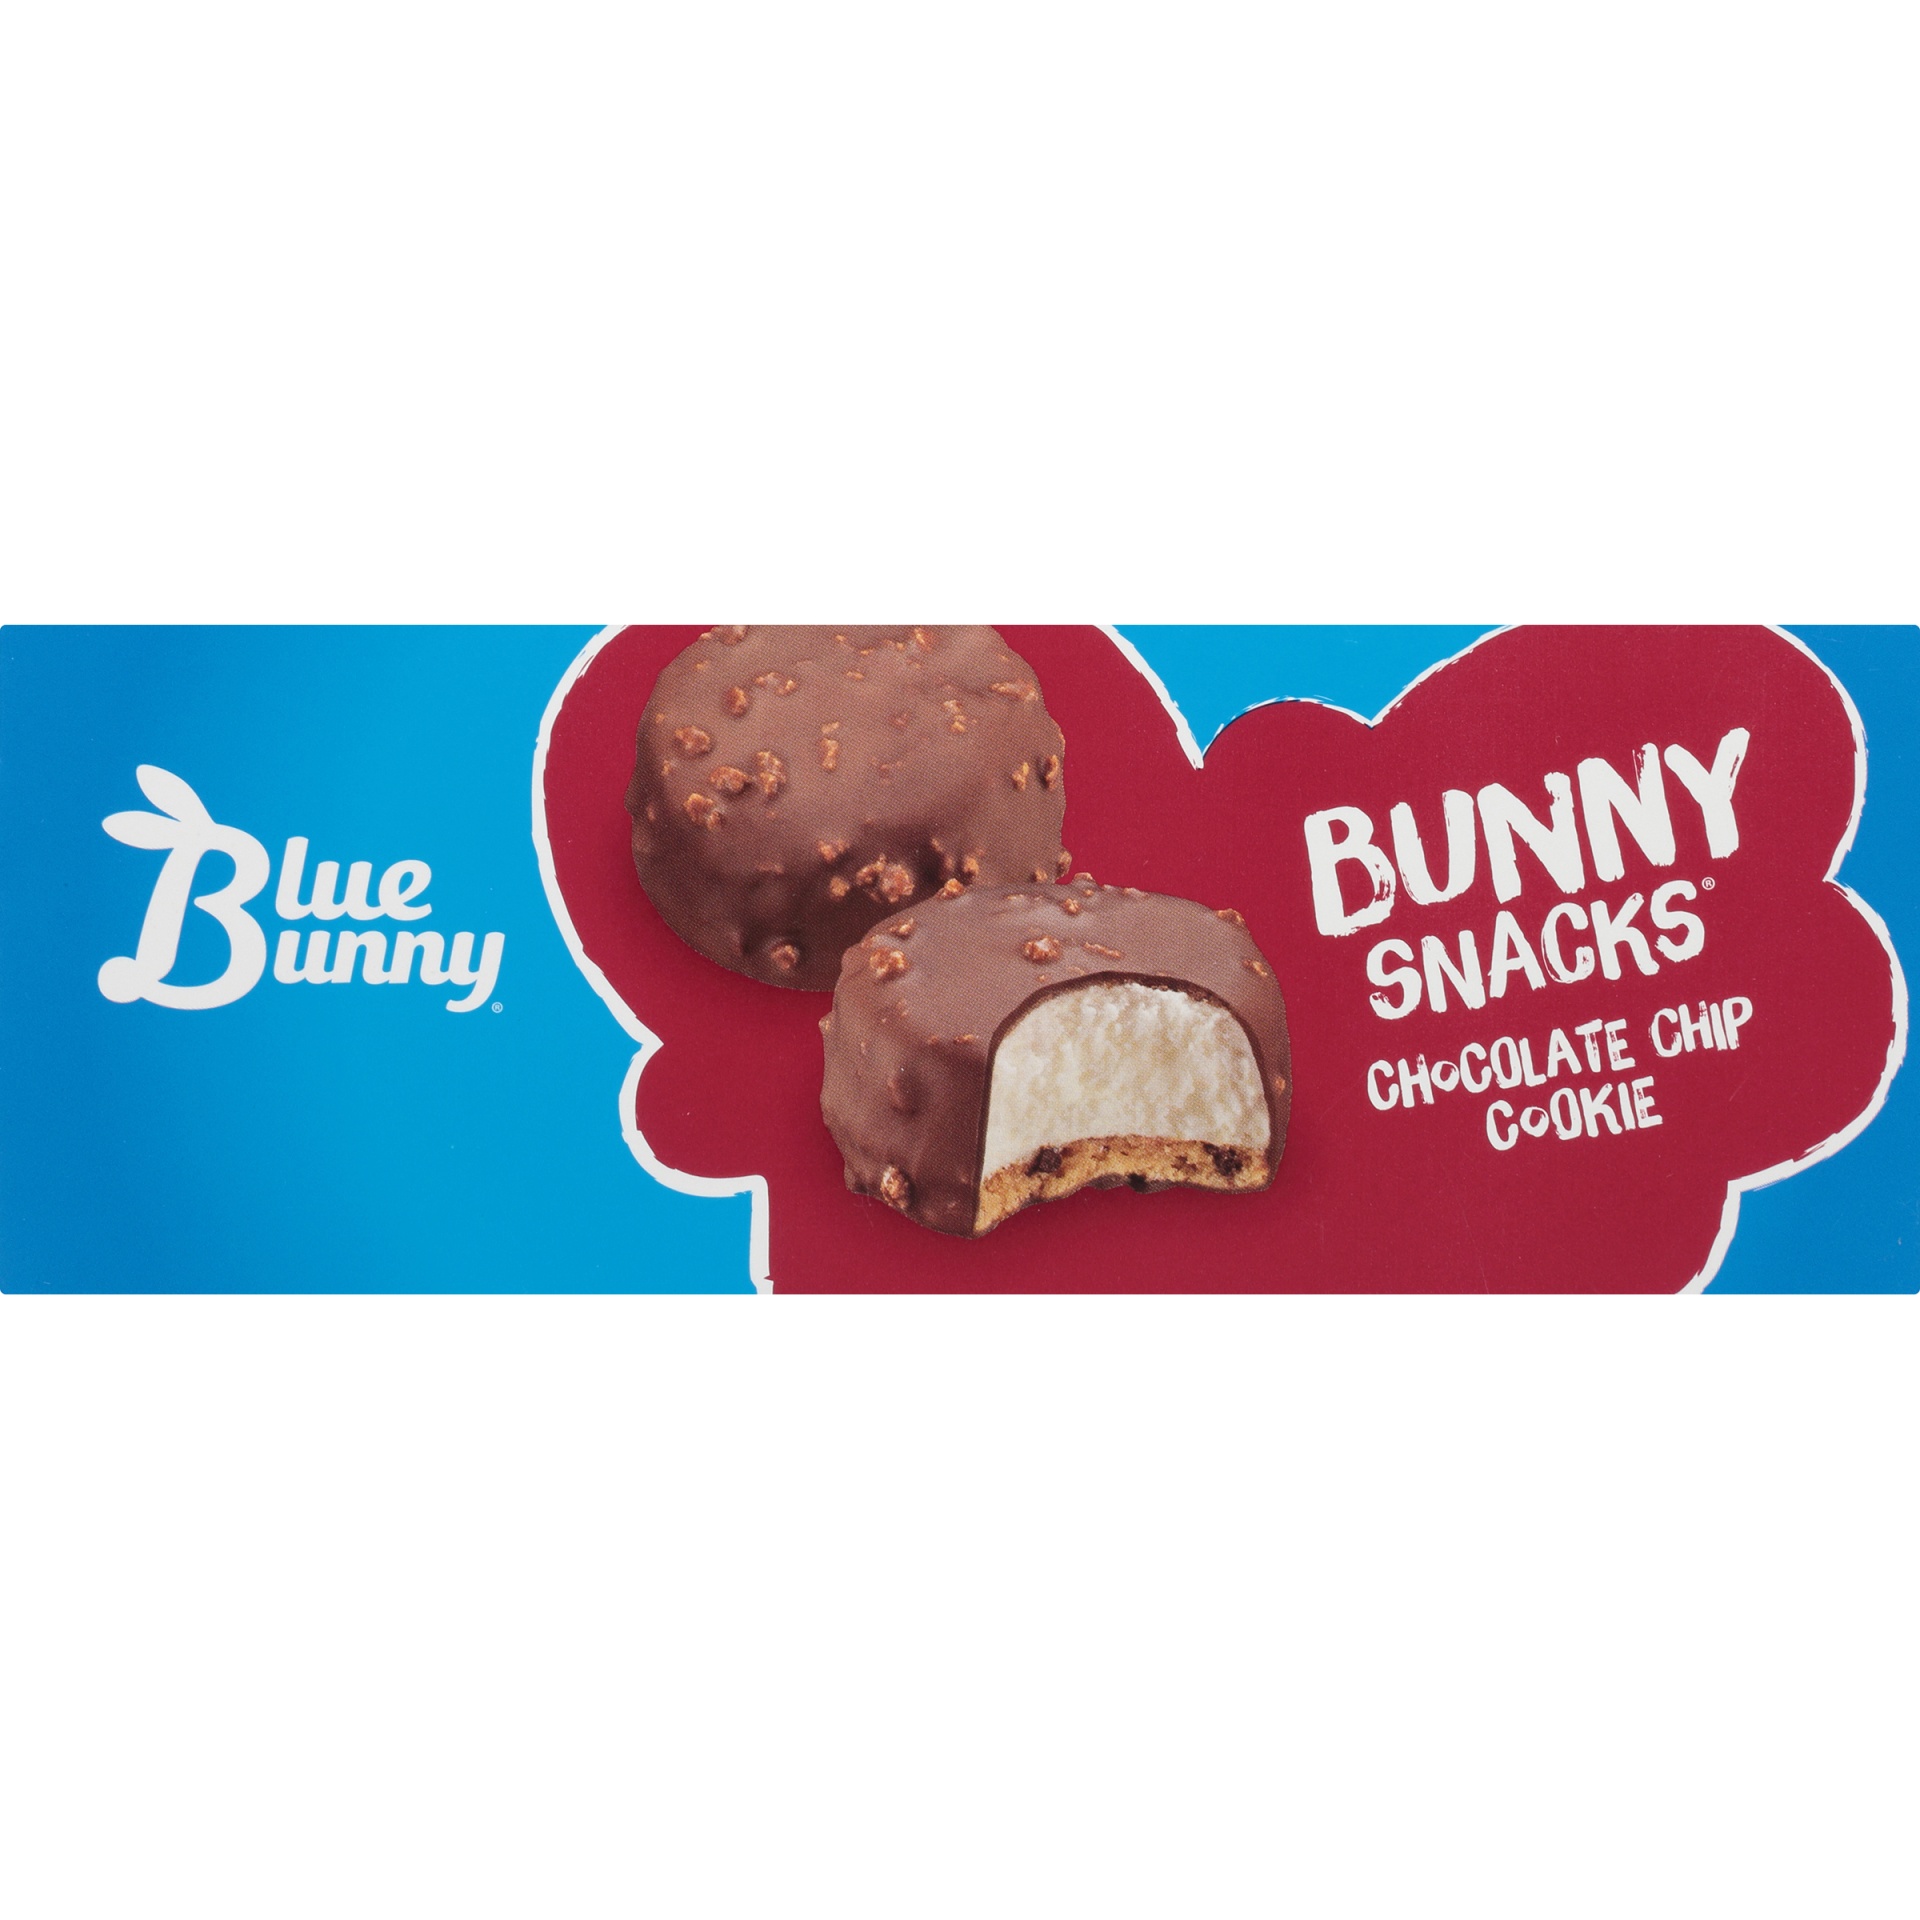 slide 4 of 7, Blue Bunny Bunny Snacks Chocolate Chip Cookie Reduced Fat Ice Cream , 19.2 fl oz; 8 ct